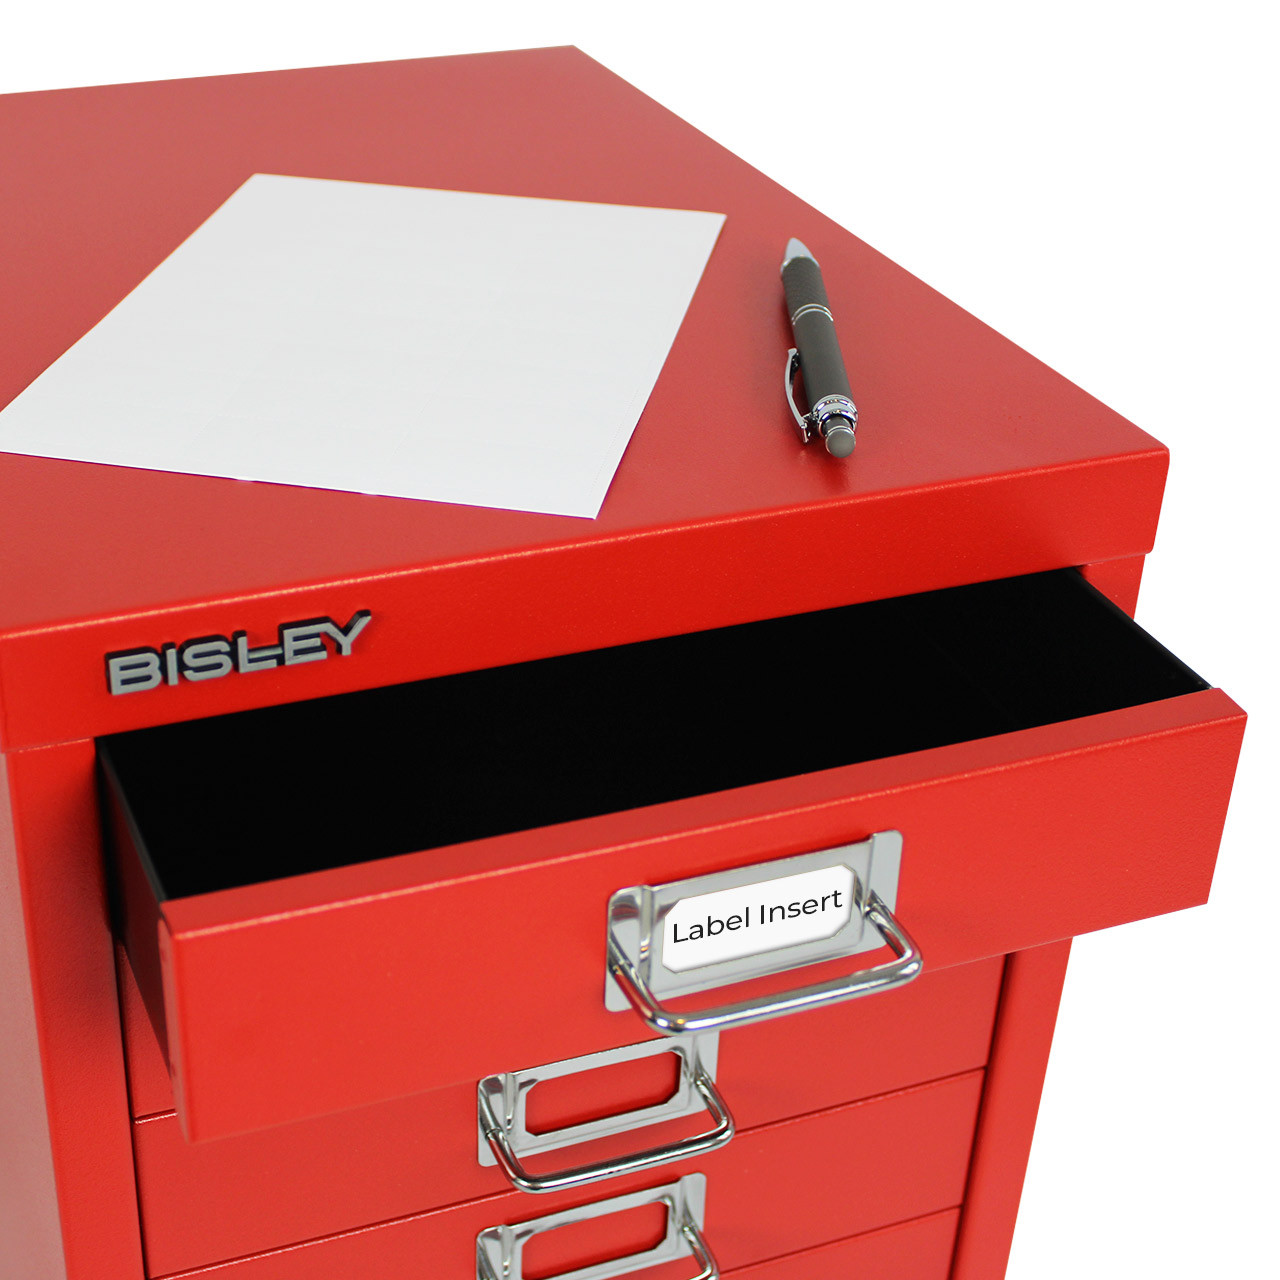 Our Bisley 5-Drawer Cabinet comes in so many fun colors! It's